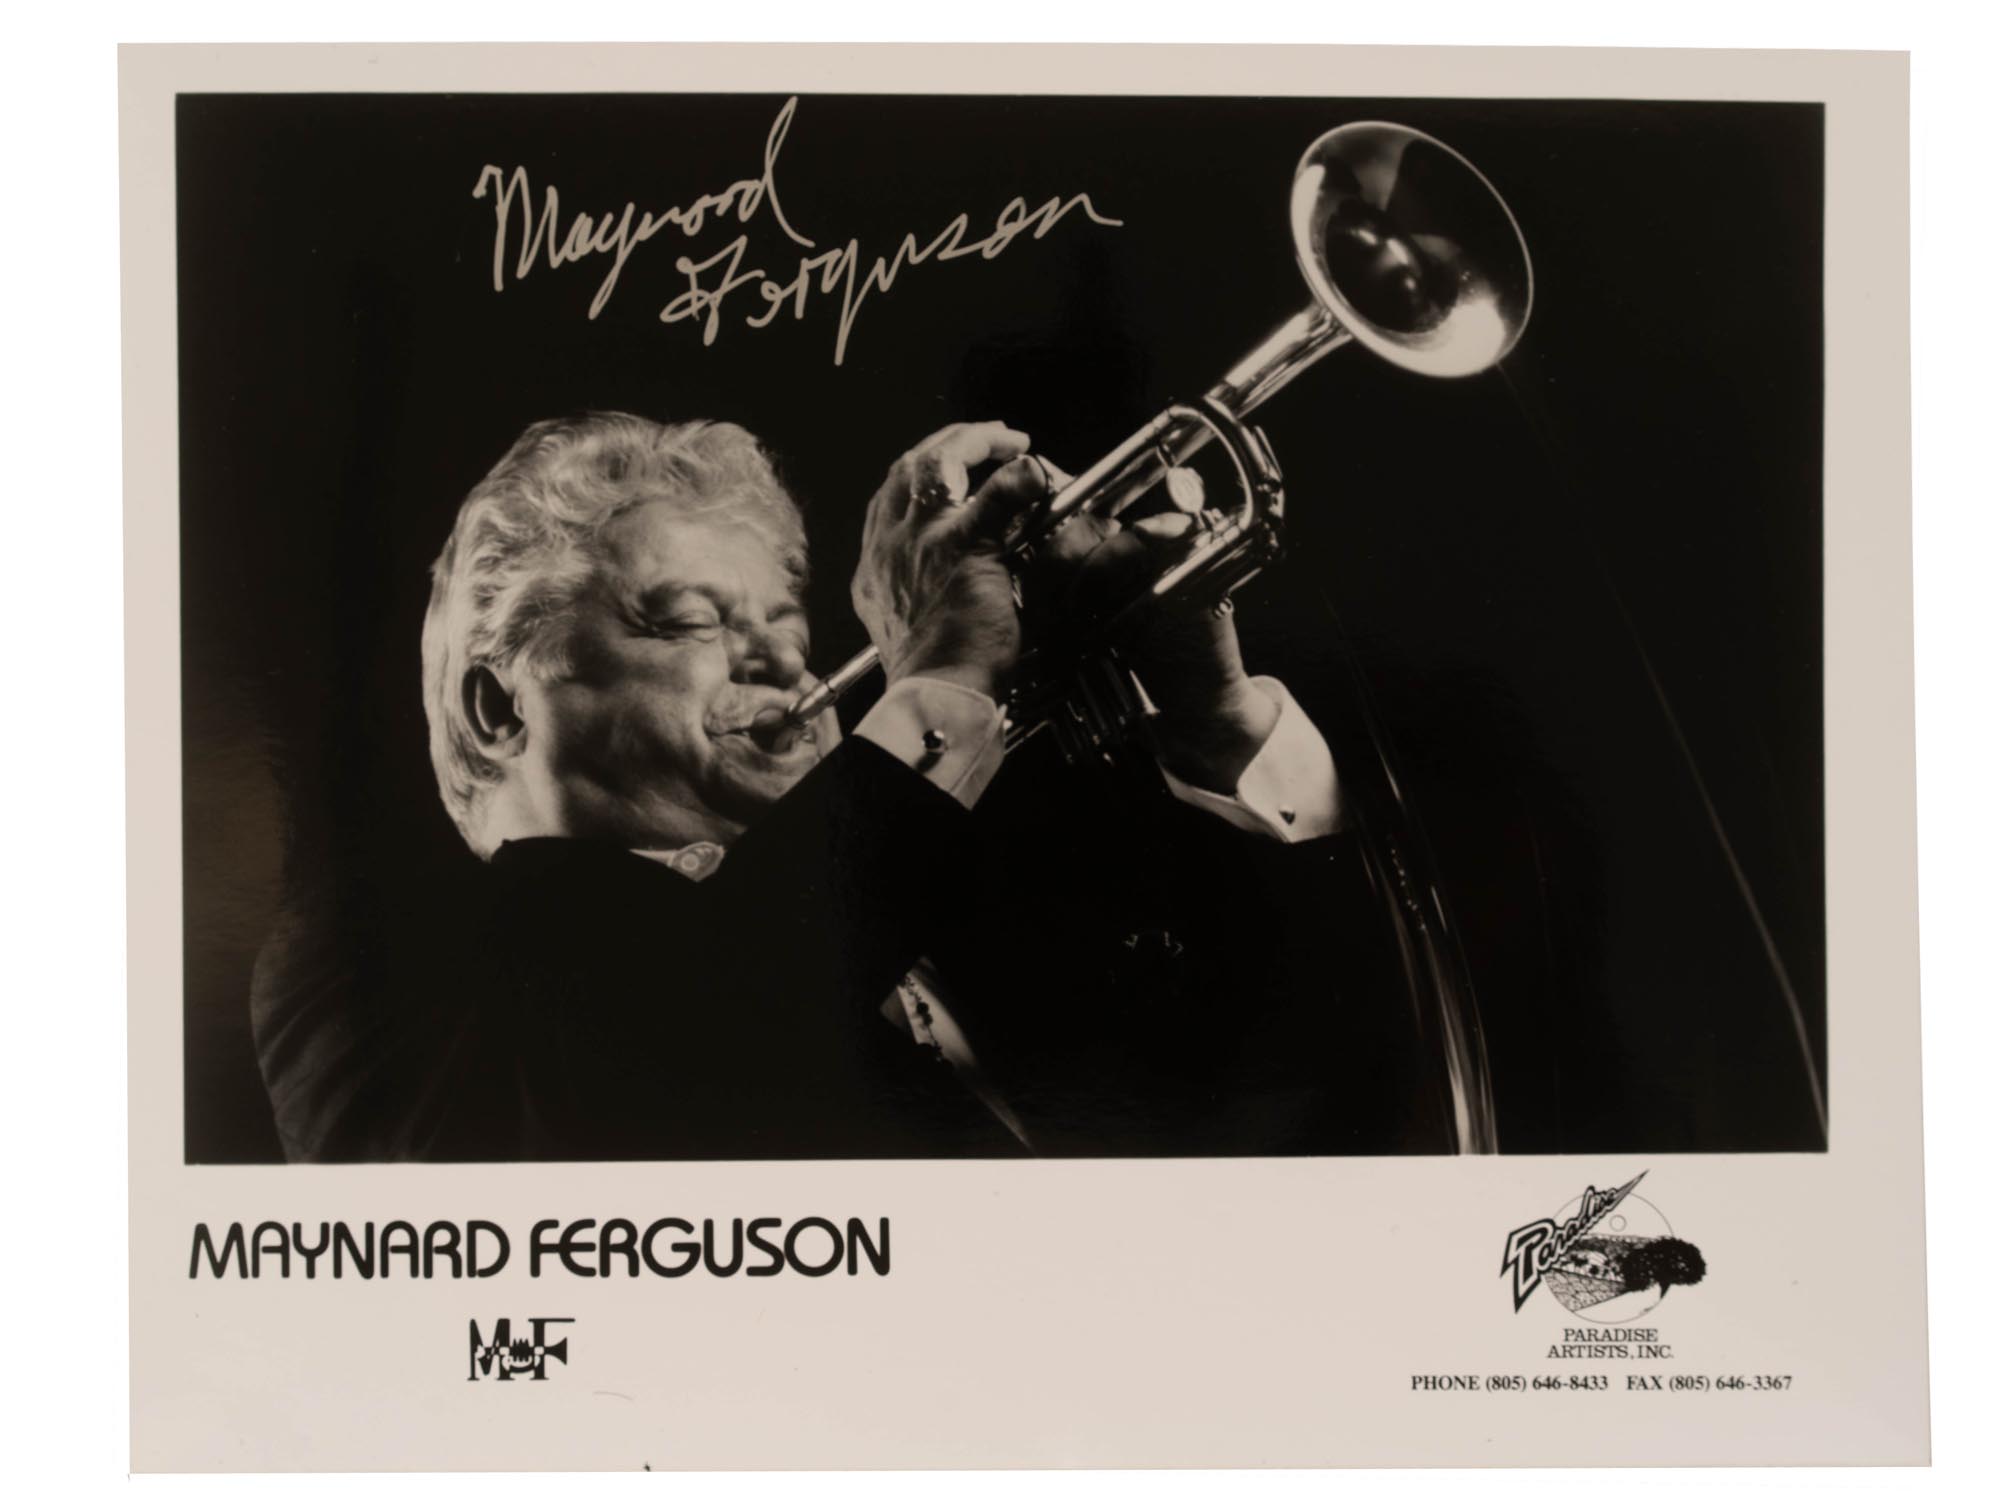 FAMOUS JAZZ MUSICIANS AND ACTOR PHOTO AUTOGRAPHS PIC-2